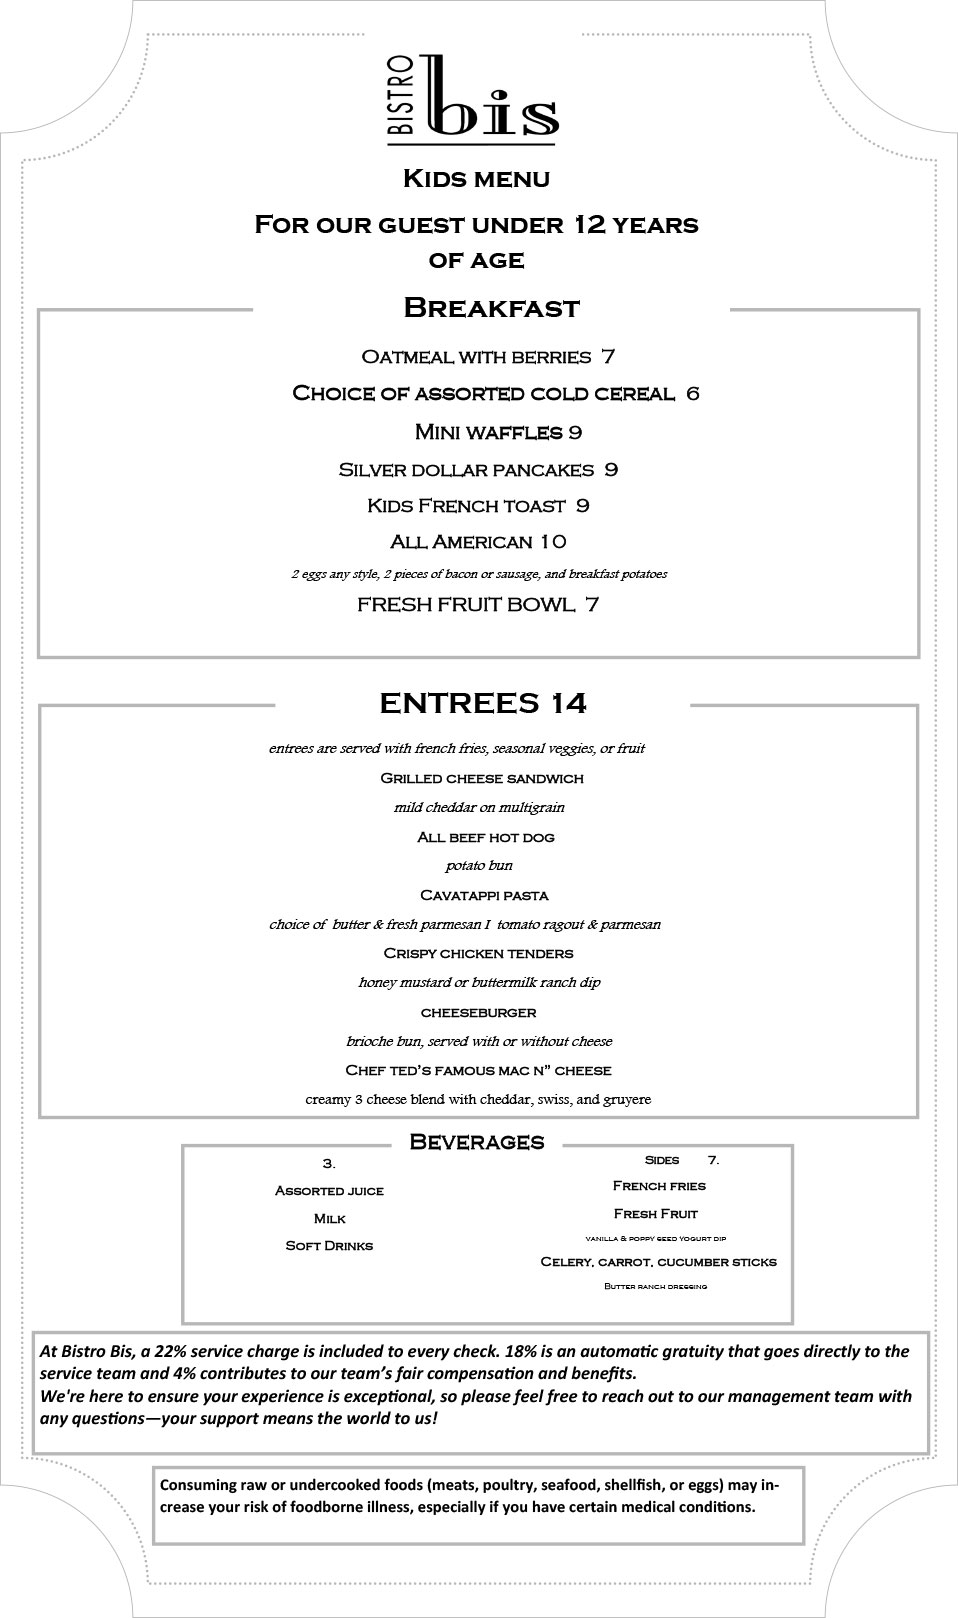 Image of Bistro Bis Kids menu featuring French cuisine